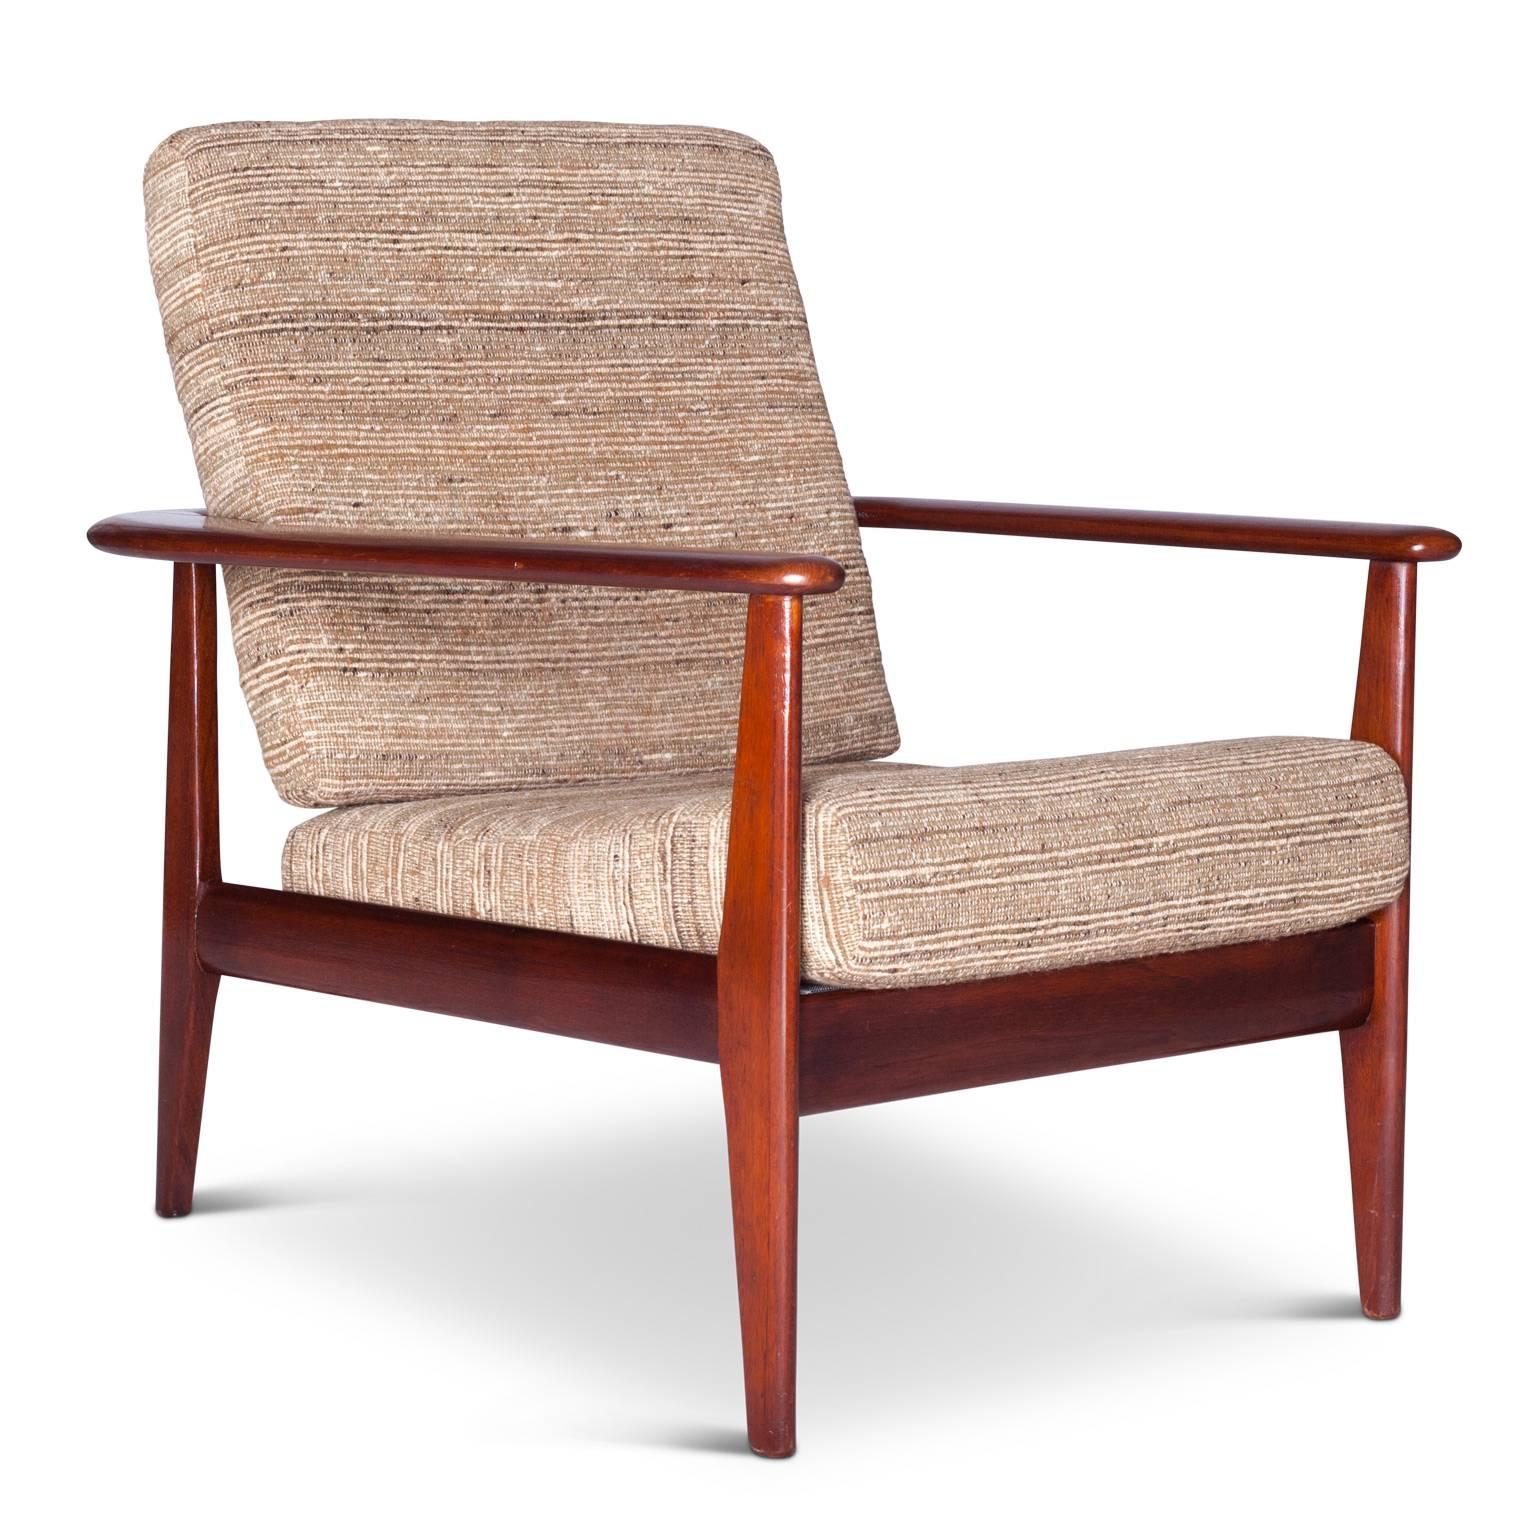 Mid-20th Century Pair of Danish Armchairs In Mahogany with Original Cushions, circa 1960 For Sale